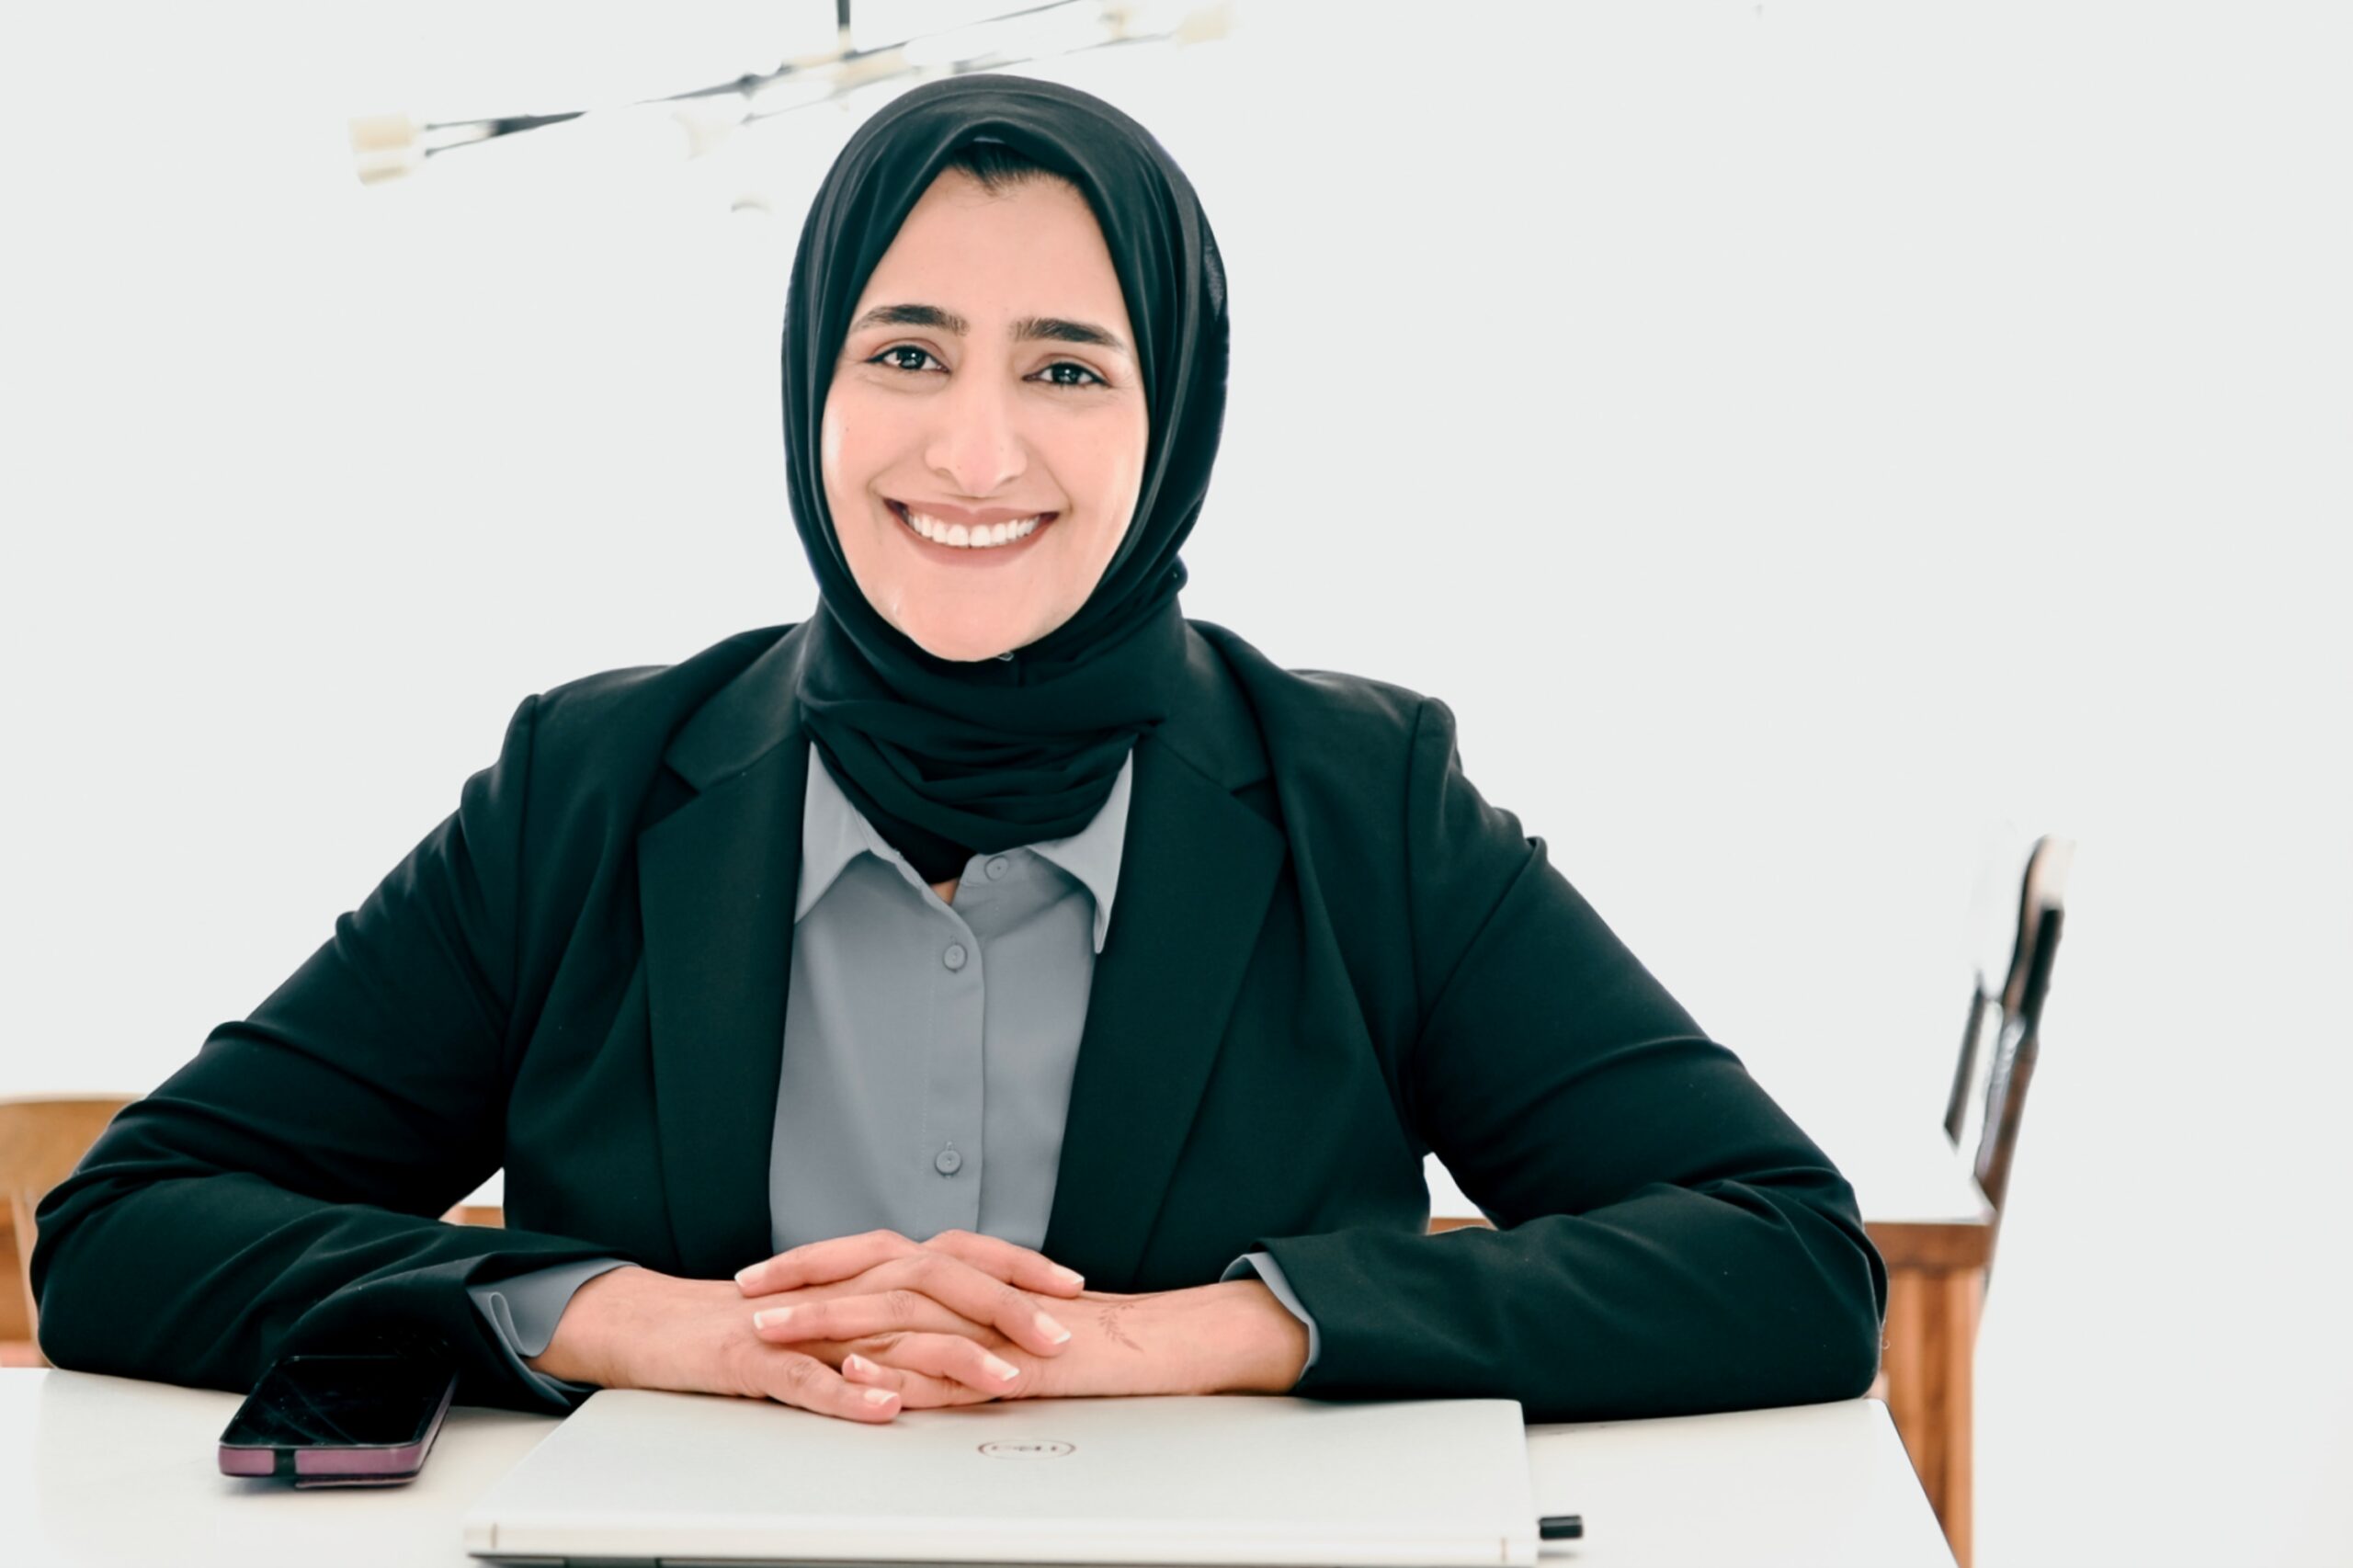 middle eastern woman smiling and seated in a chair with her hands folded together on a desk